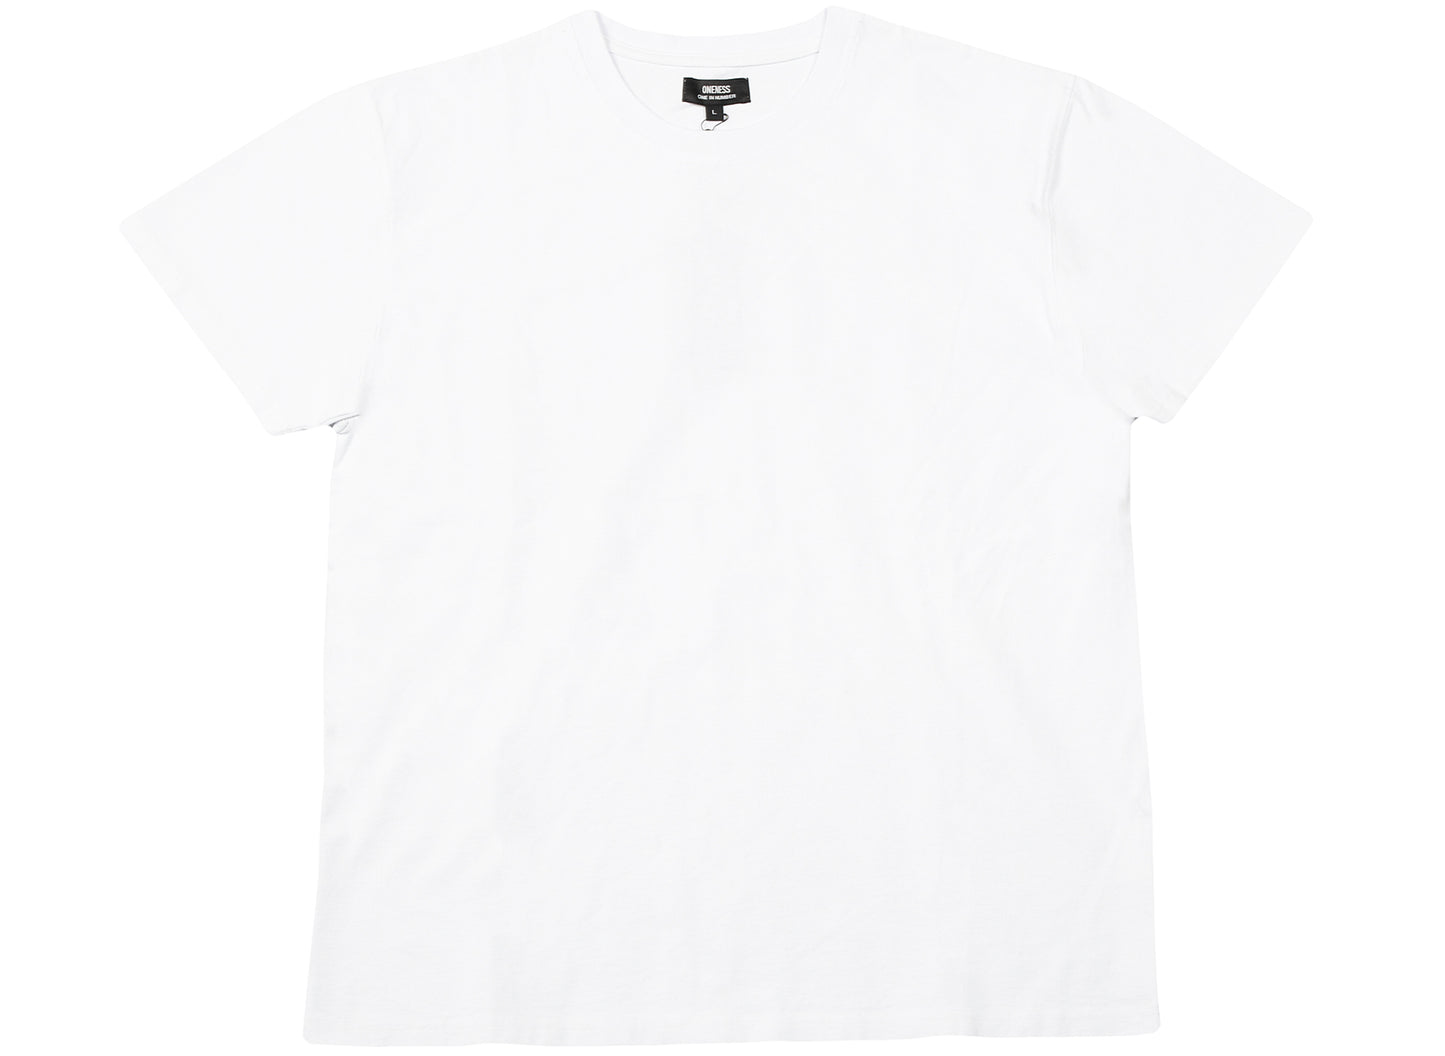 Oneness Riley Tee in Vintage White